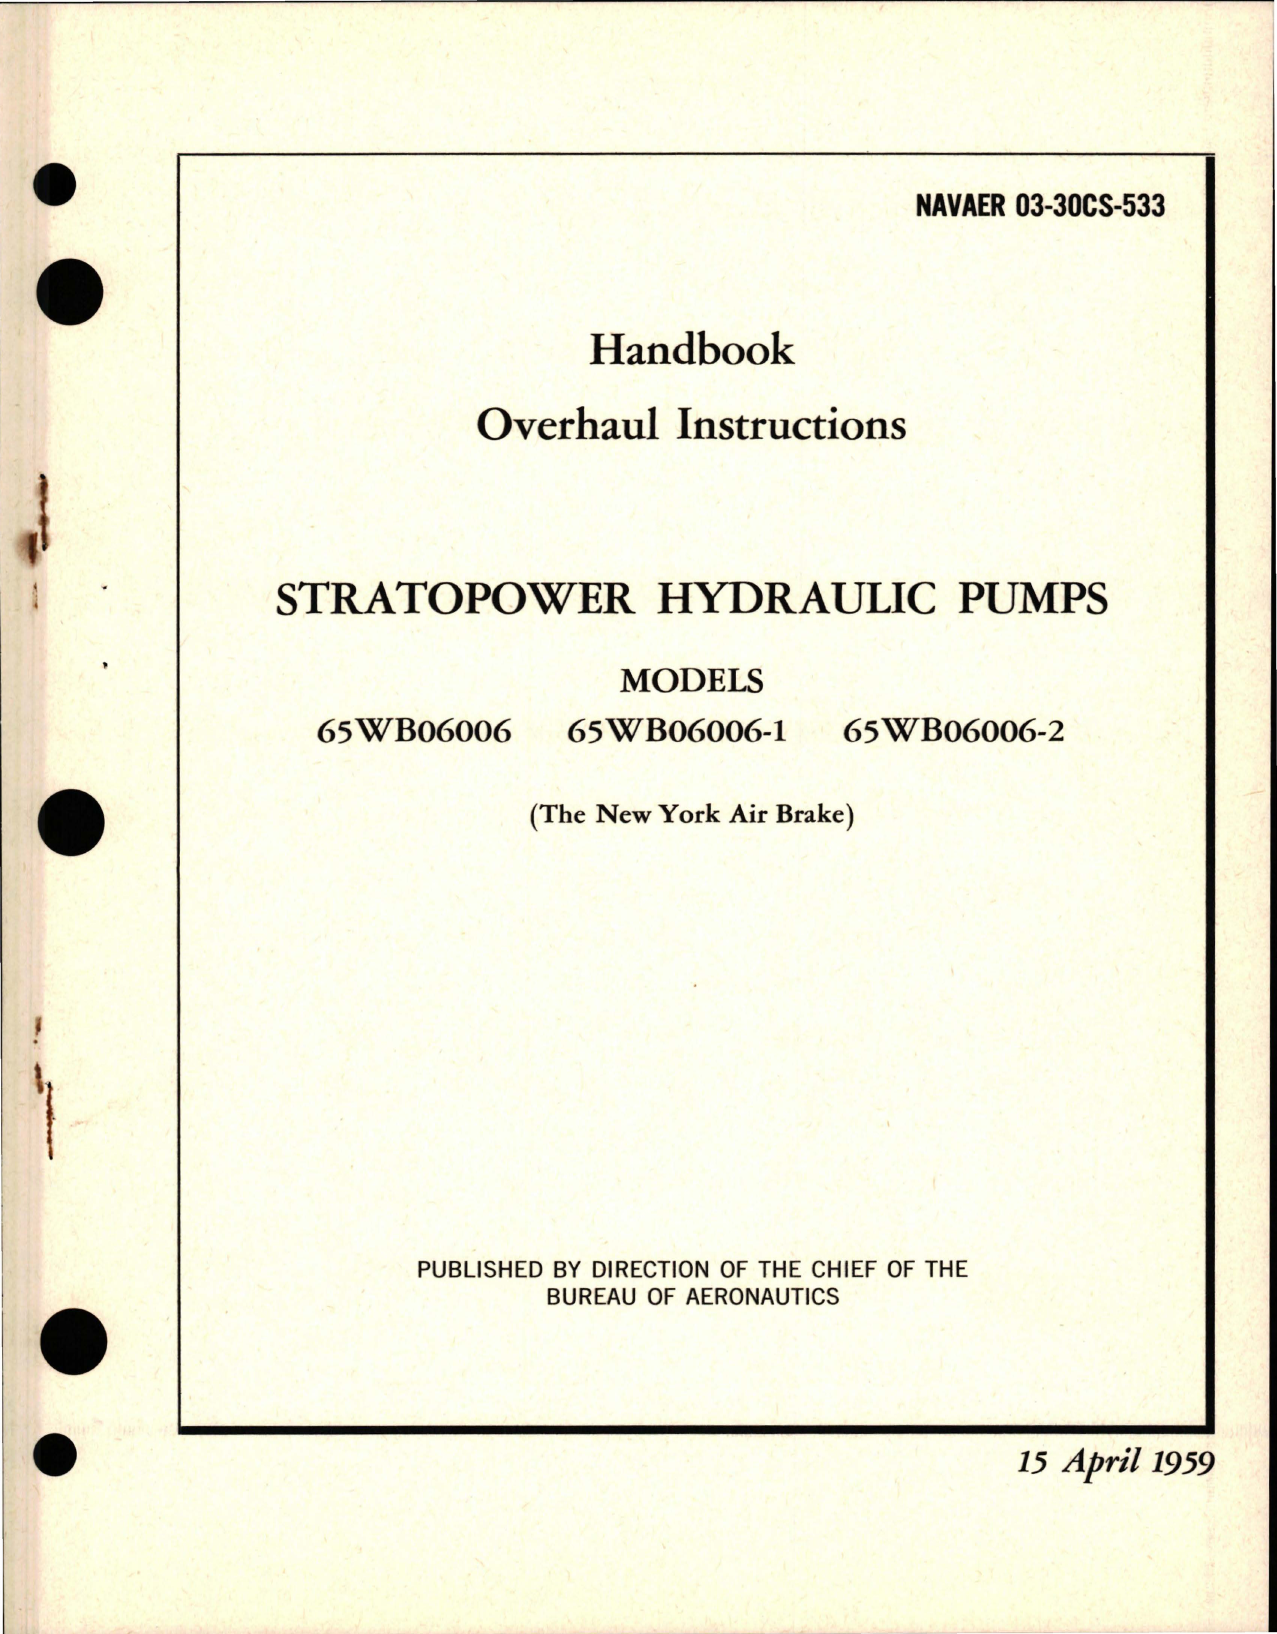 Sample page 1 from AirCorps Library document: Overhaul Instructions for Stratopower Hydraulic Pumps - Models 65WB06006, 65WB06006-1, 65WB06006-2 